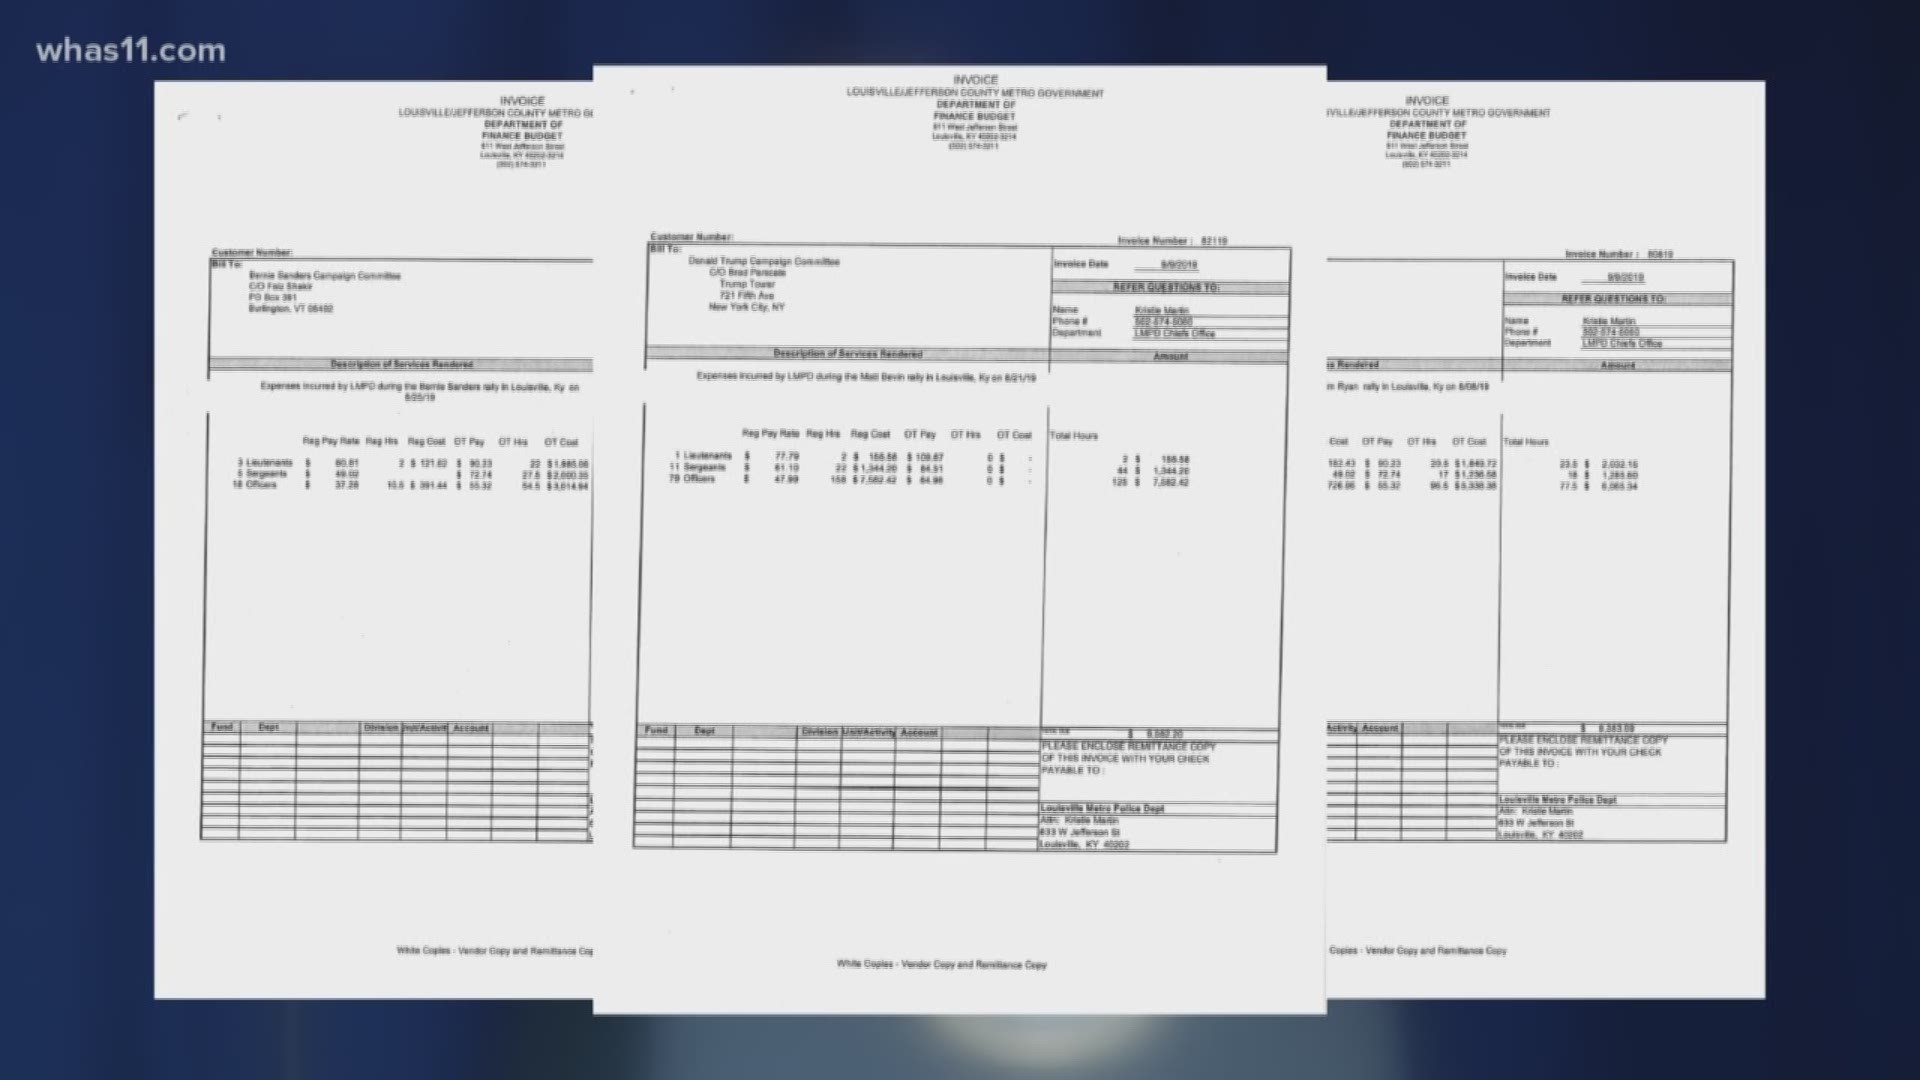 WHAS-TV obtained copies of invoices from Louisville Metro Government for the cost of services provided by Metro Police for three separate campaign visits.